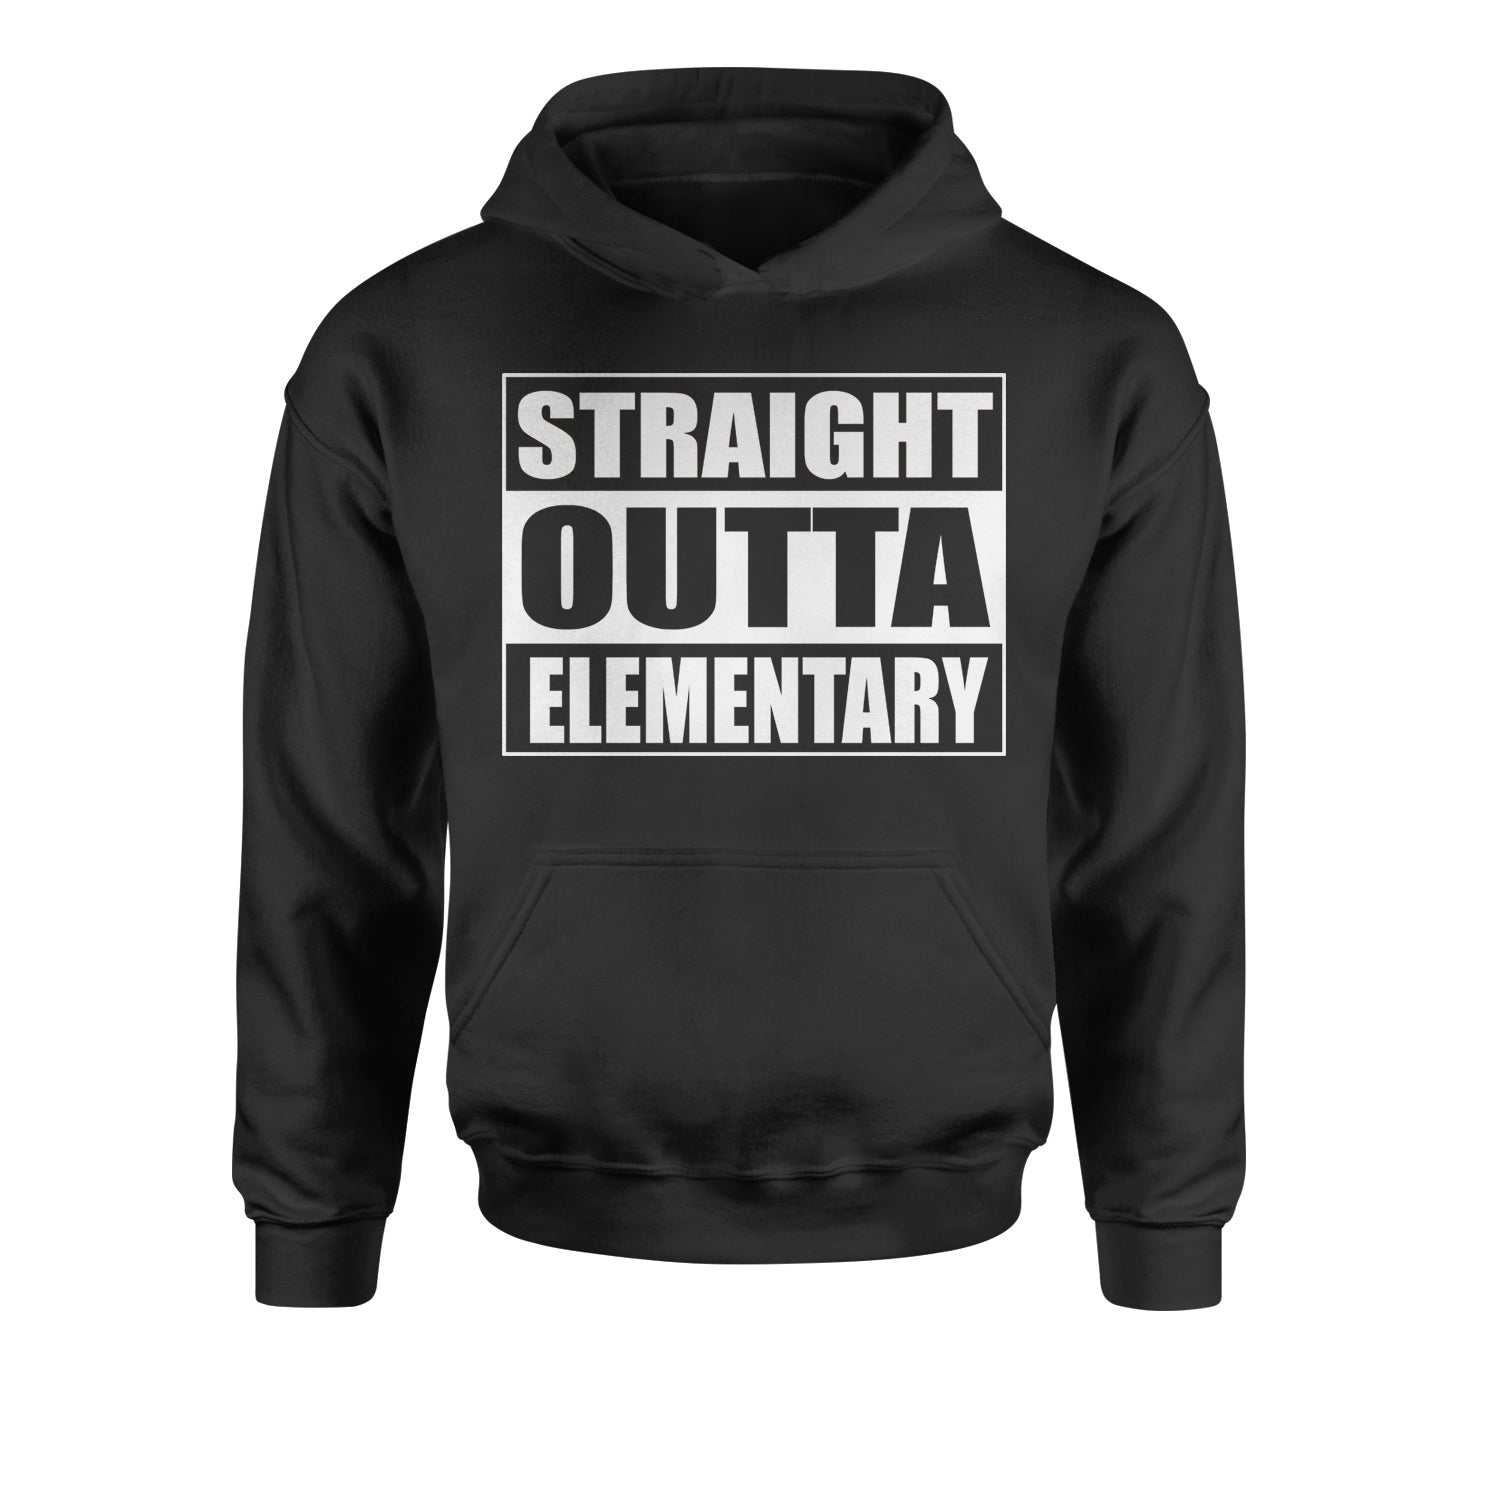 Straight Outta Elementary Youth-Sized Hoodie 2020, 2021, 2022, class, of, quarantine, queen by Expression Tees